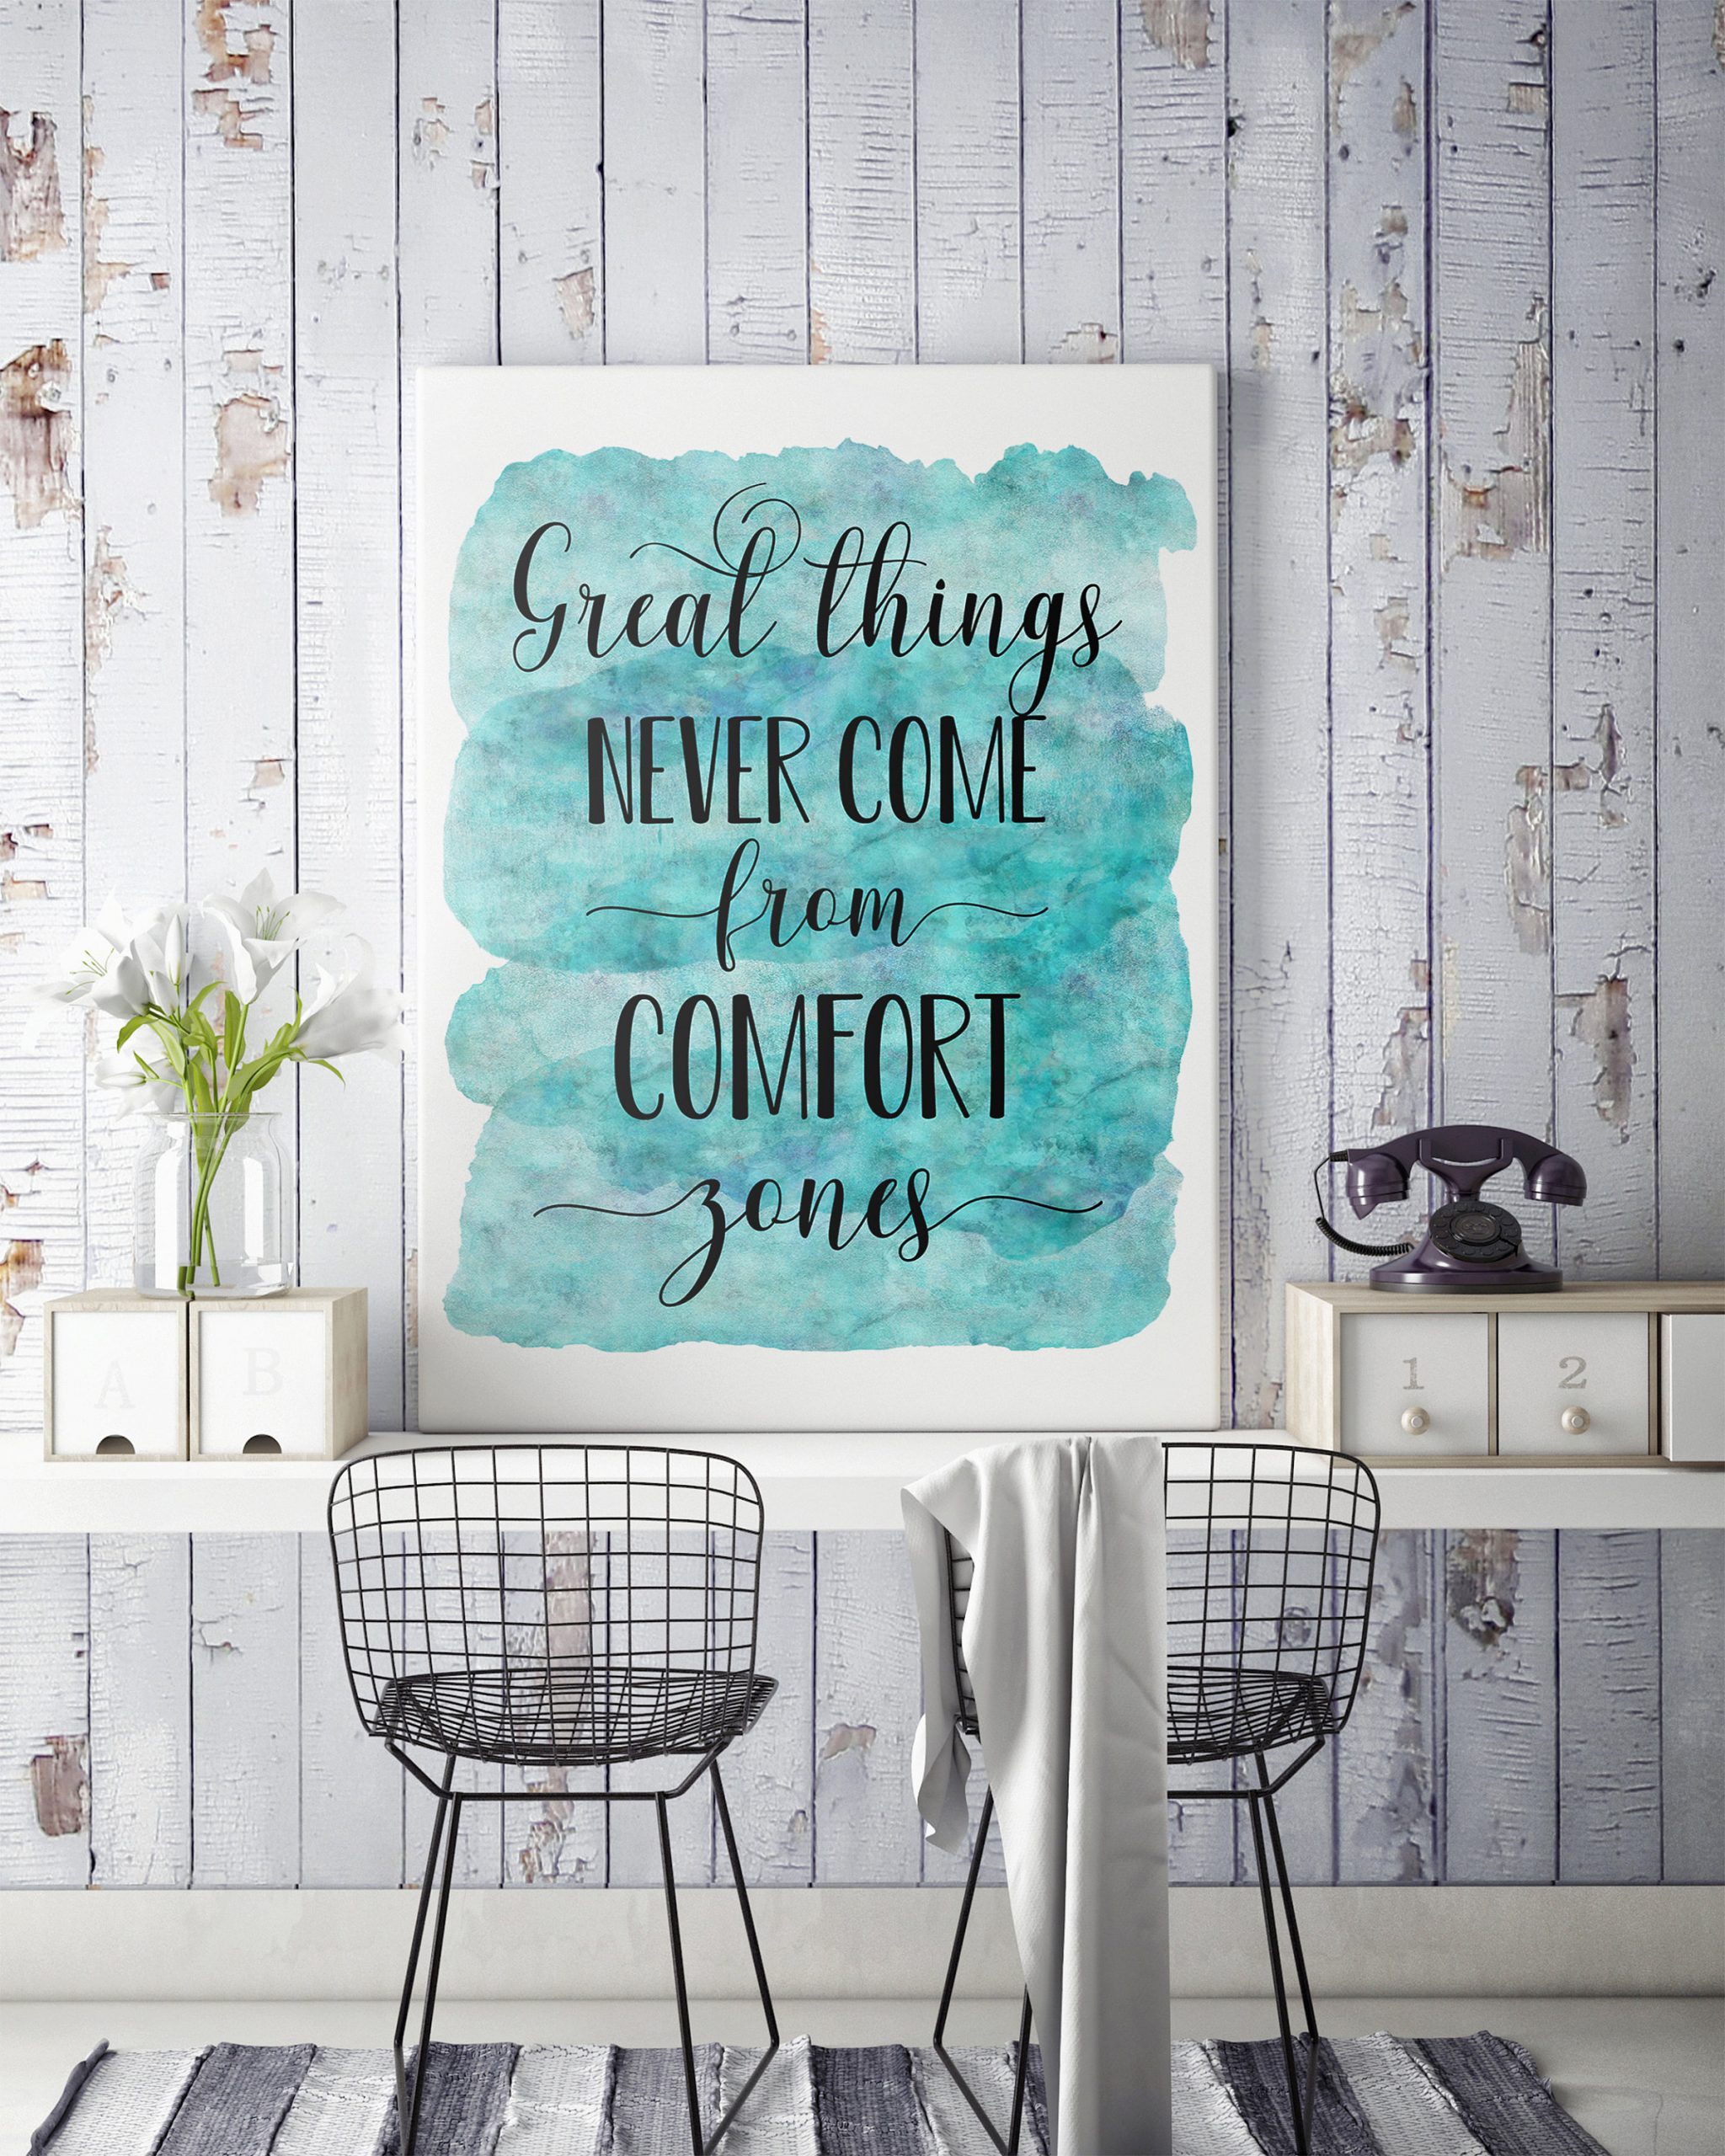 Great Things Never Come From Comfort Zones, Nursery Print,Motivation Art